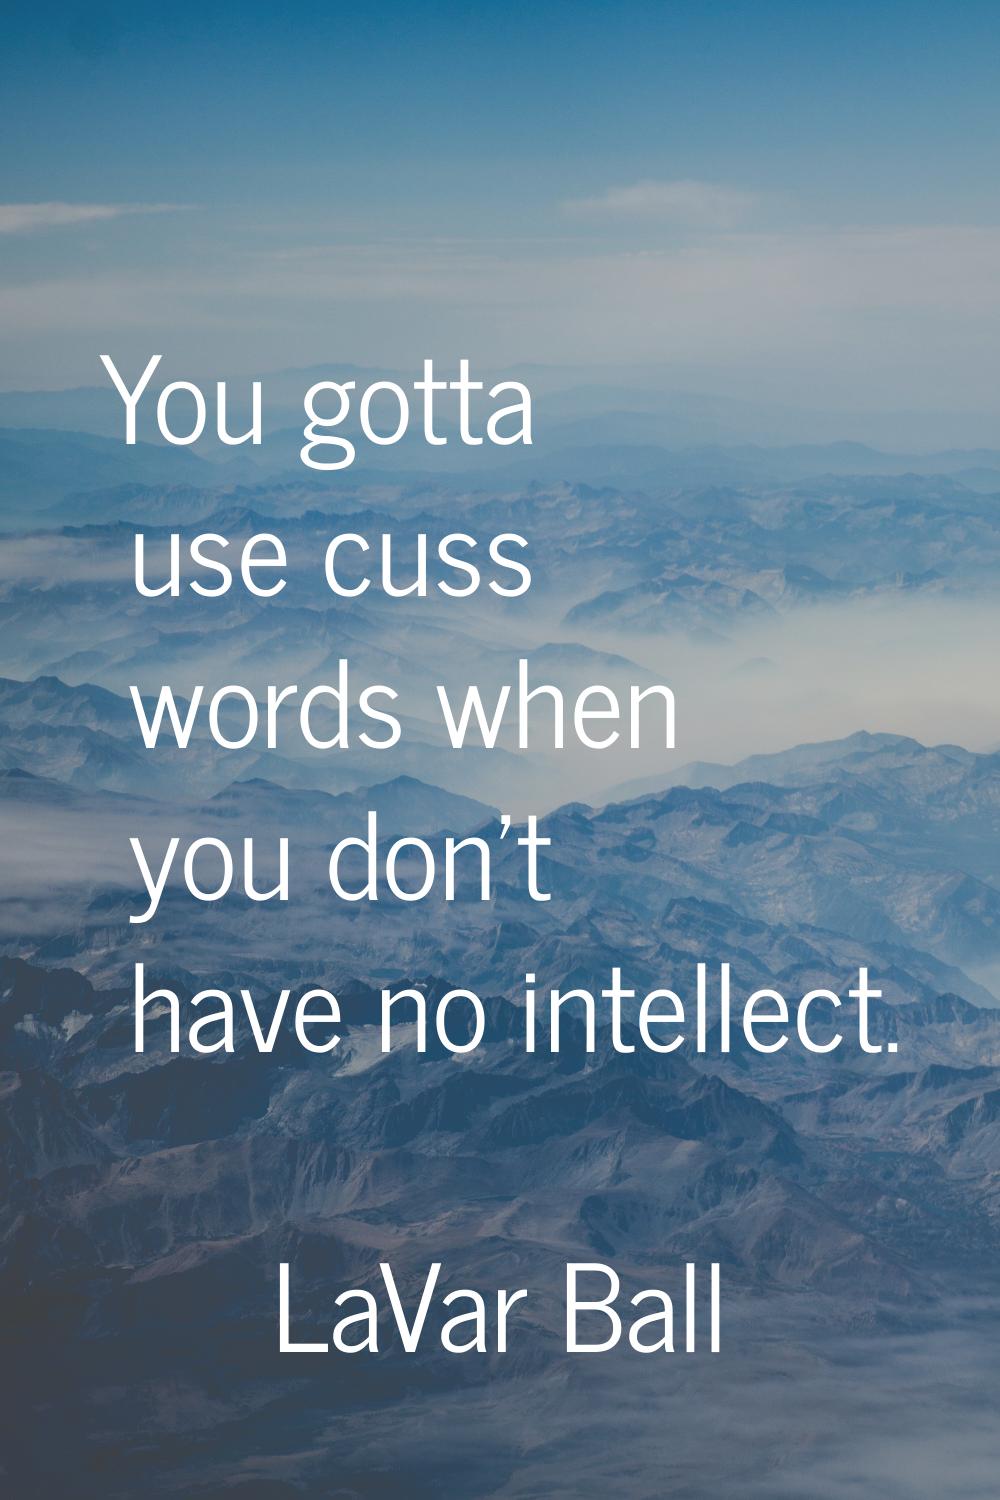 You gotta use cuss words when you don't have no intellect.